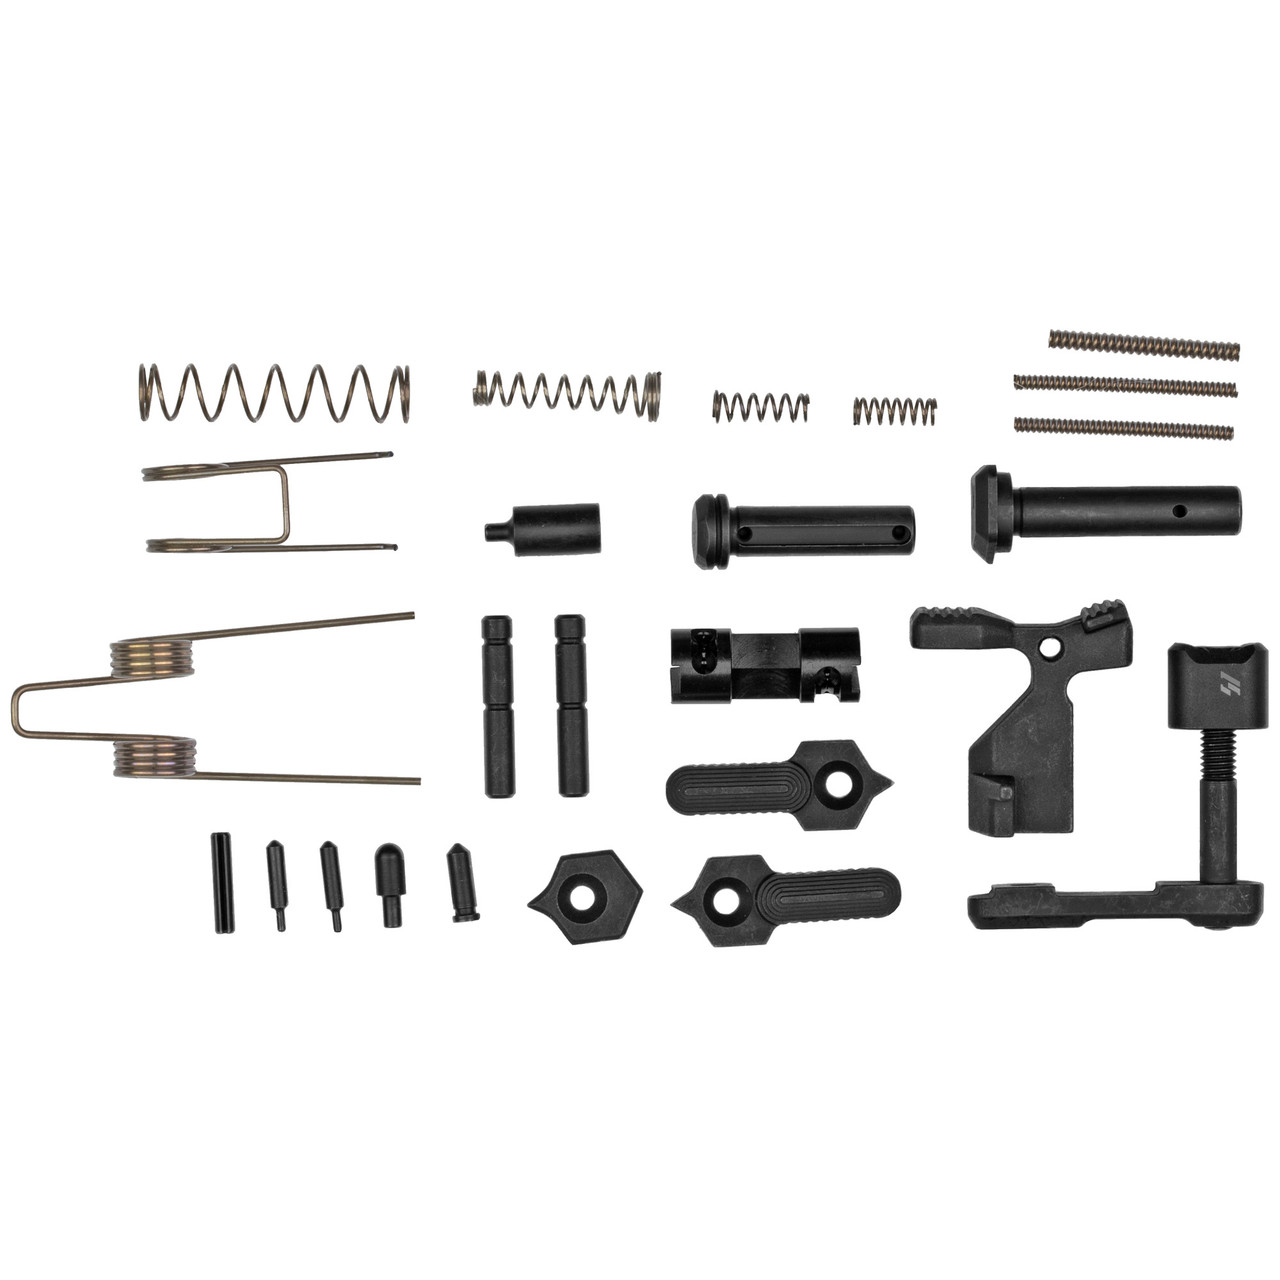 Strike Industries, Lower Parts Kit, Does Not Include Fire Control Group, Fits AR-15, Black